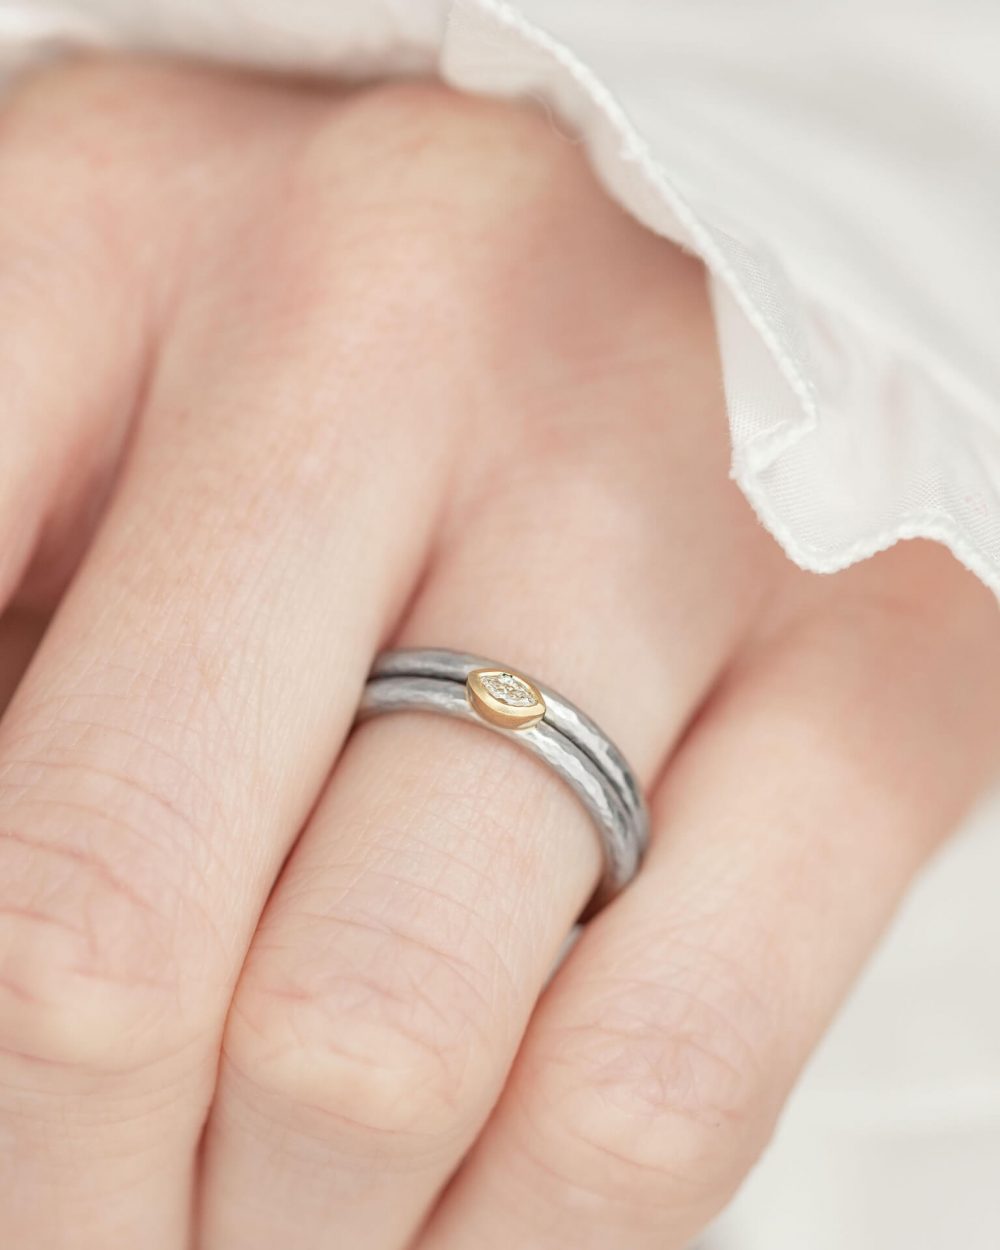 Marquise Diamond Ring Handmade In Hammered Textured Platinum, With A Yellow Gold Setting. Pictured On Model With A Matching Platinum Wedding Ring. Engagement Ring Designed By Jacks Turner Bristol Jeweller.